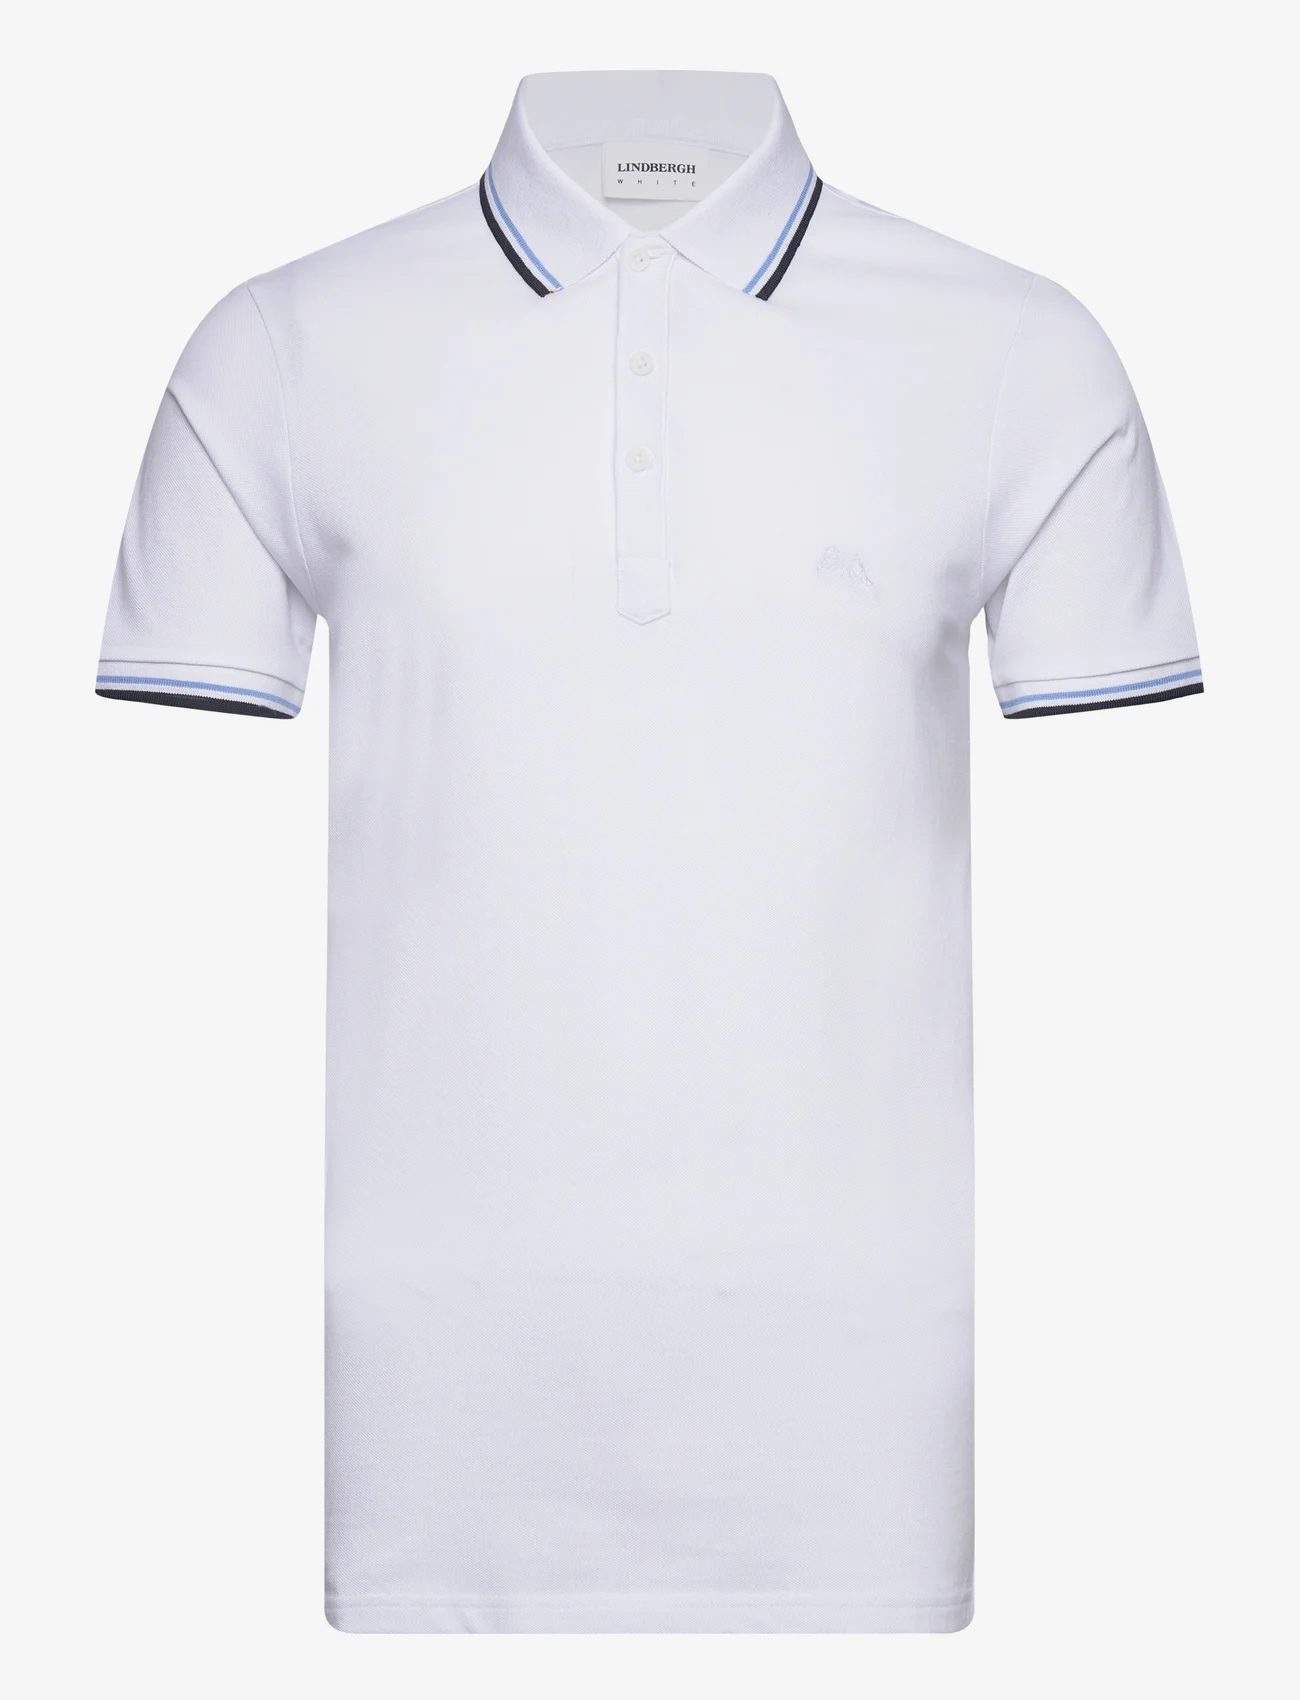 Lindbergh - Polo shirt with contrast piping - die niedrigsten preise - white 124 - 0